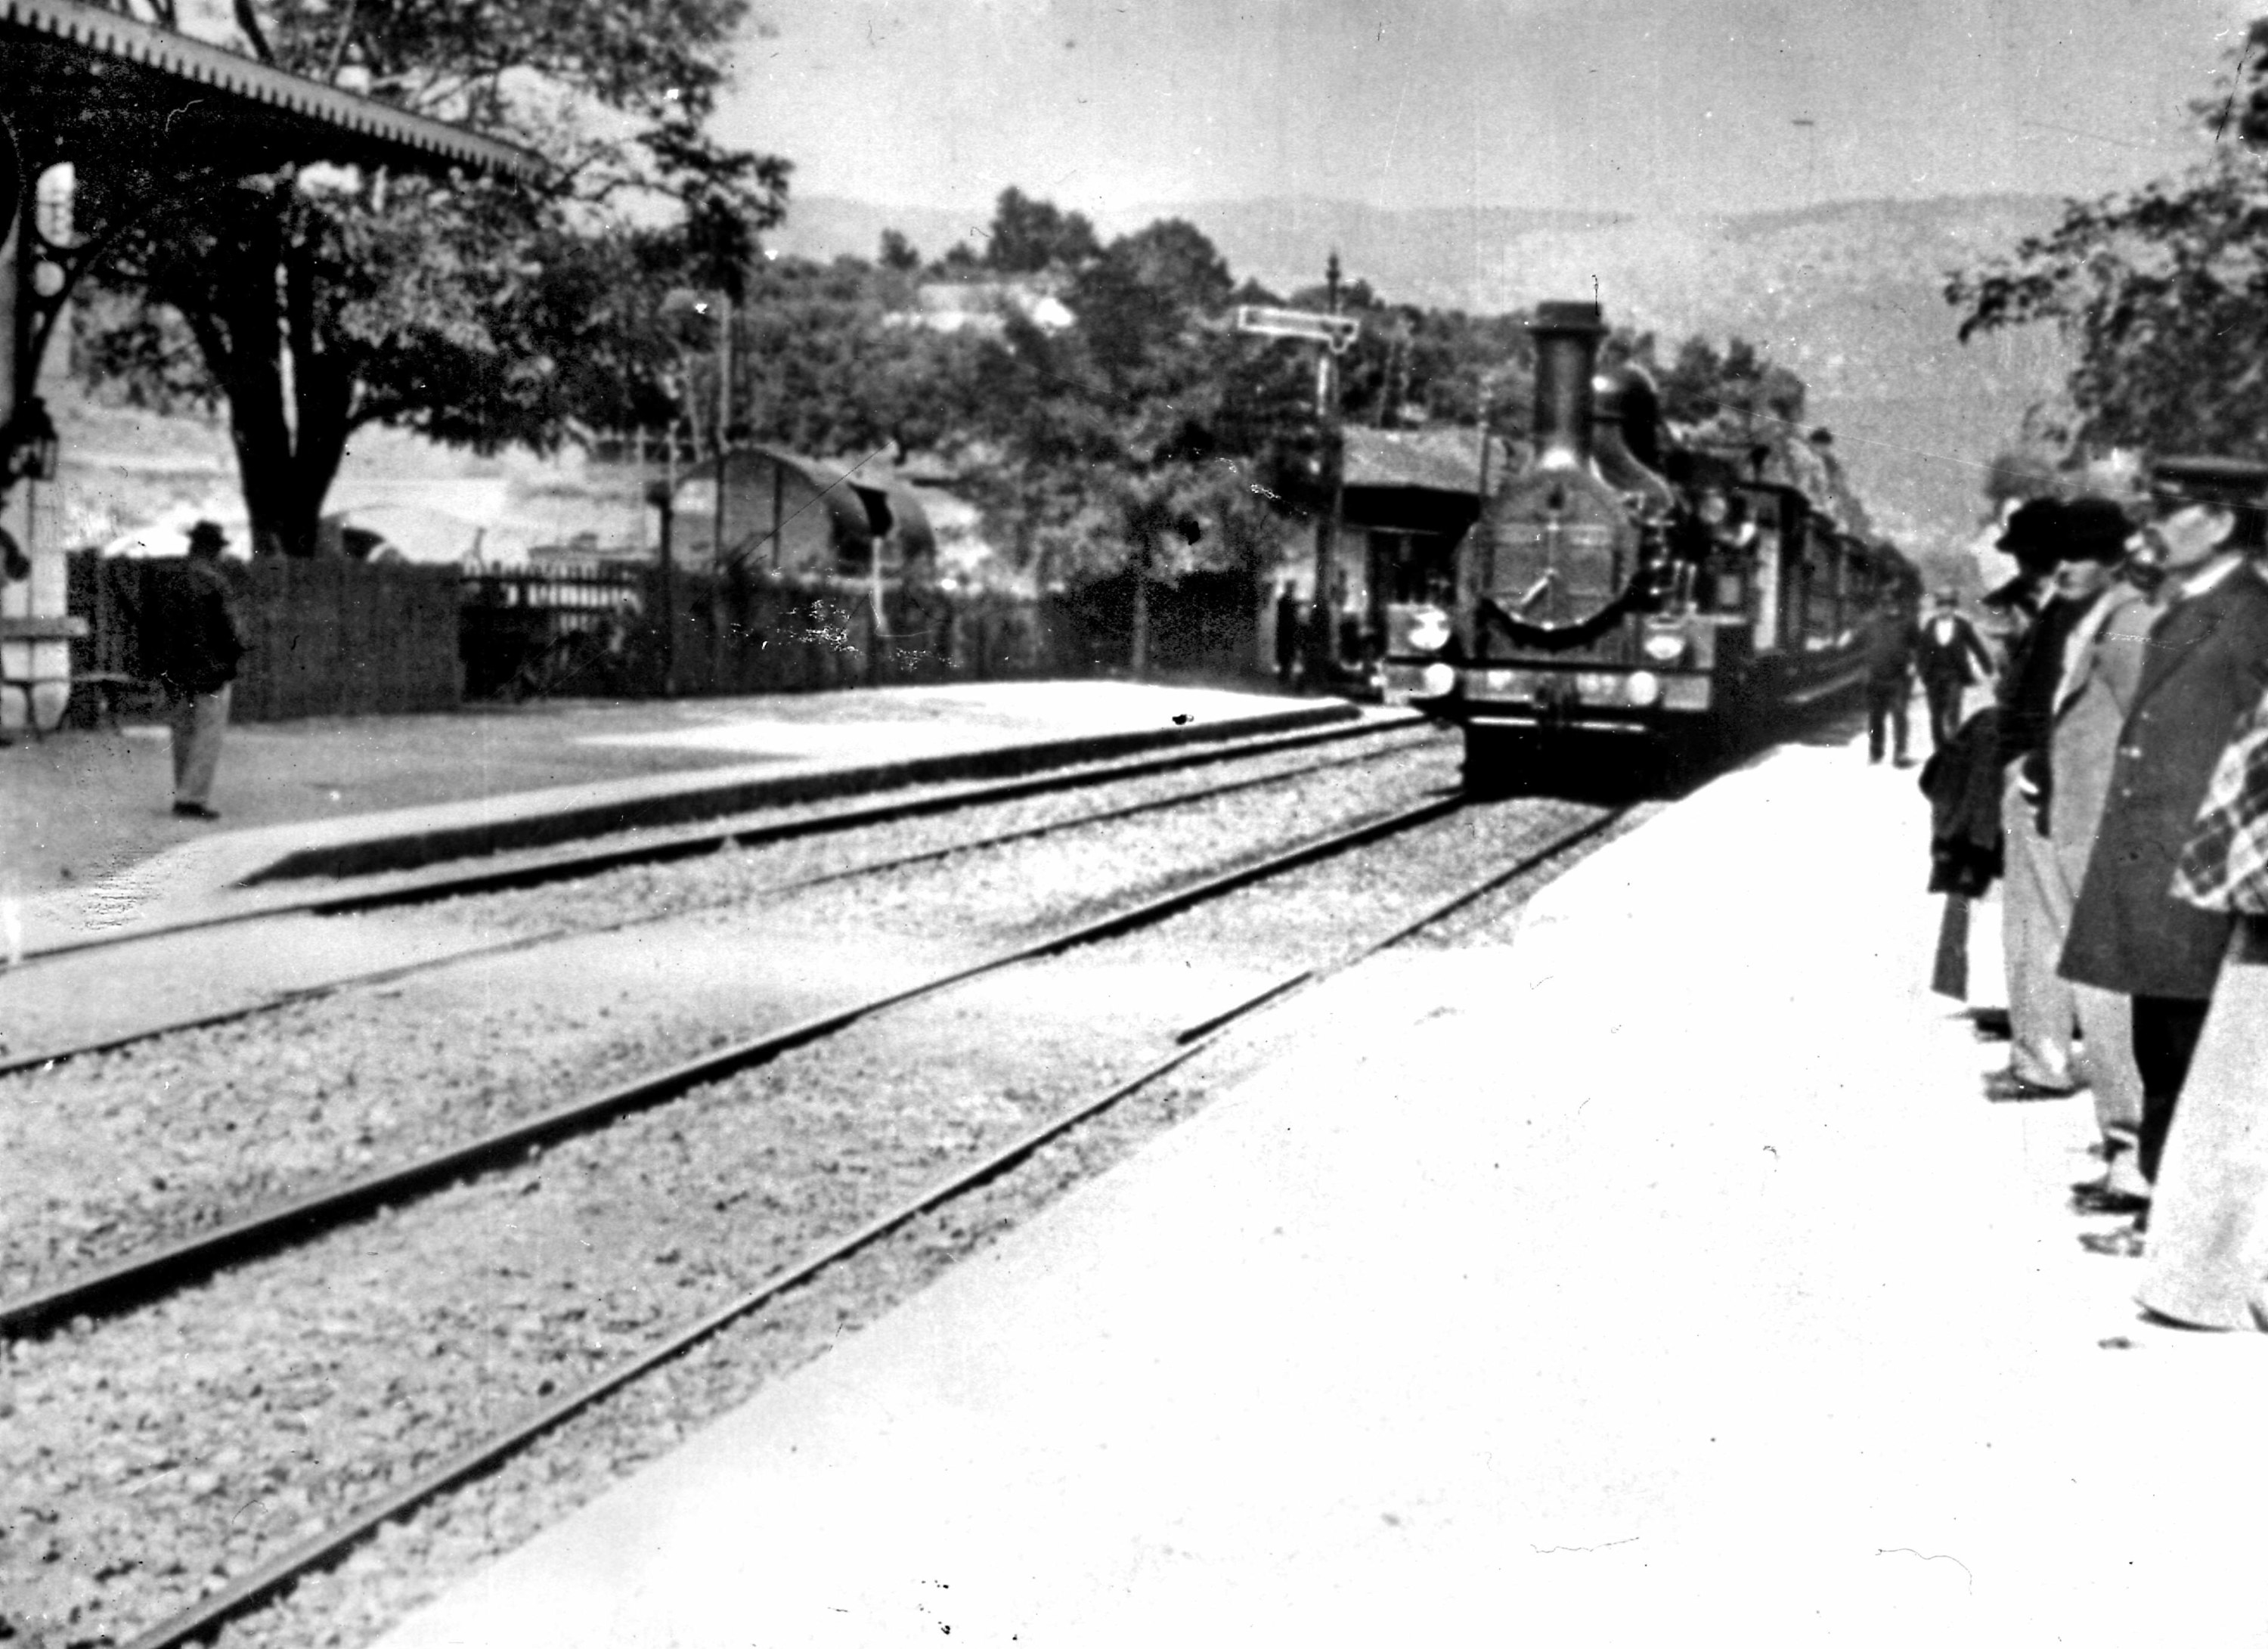 A black-and-white image of a train pulling into a station circa 1895